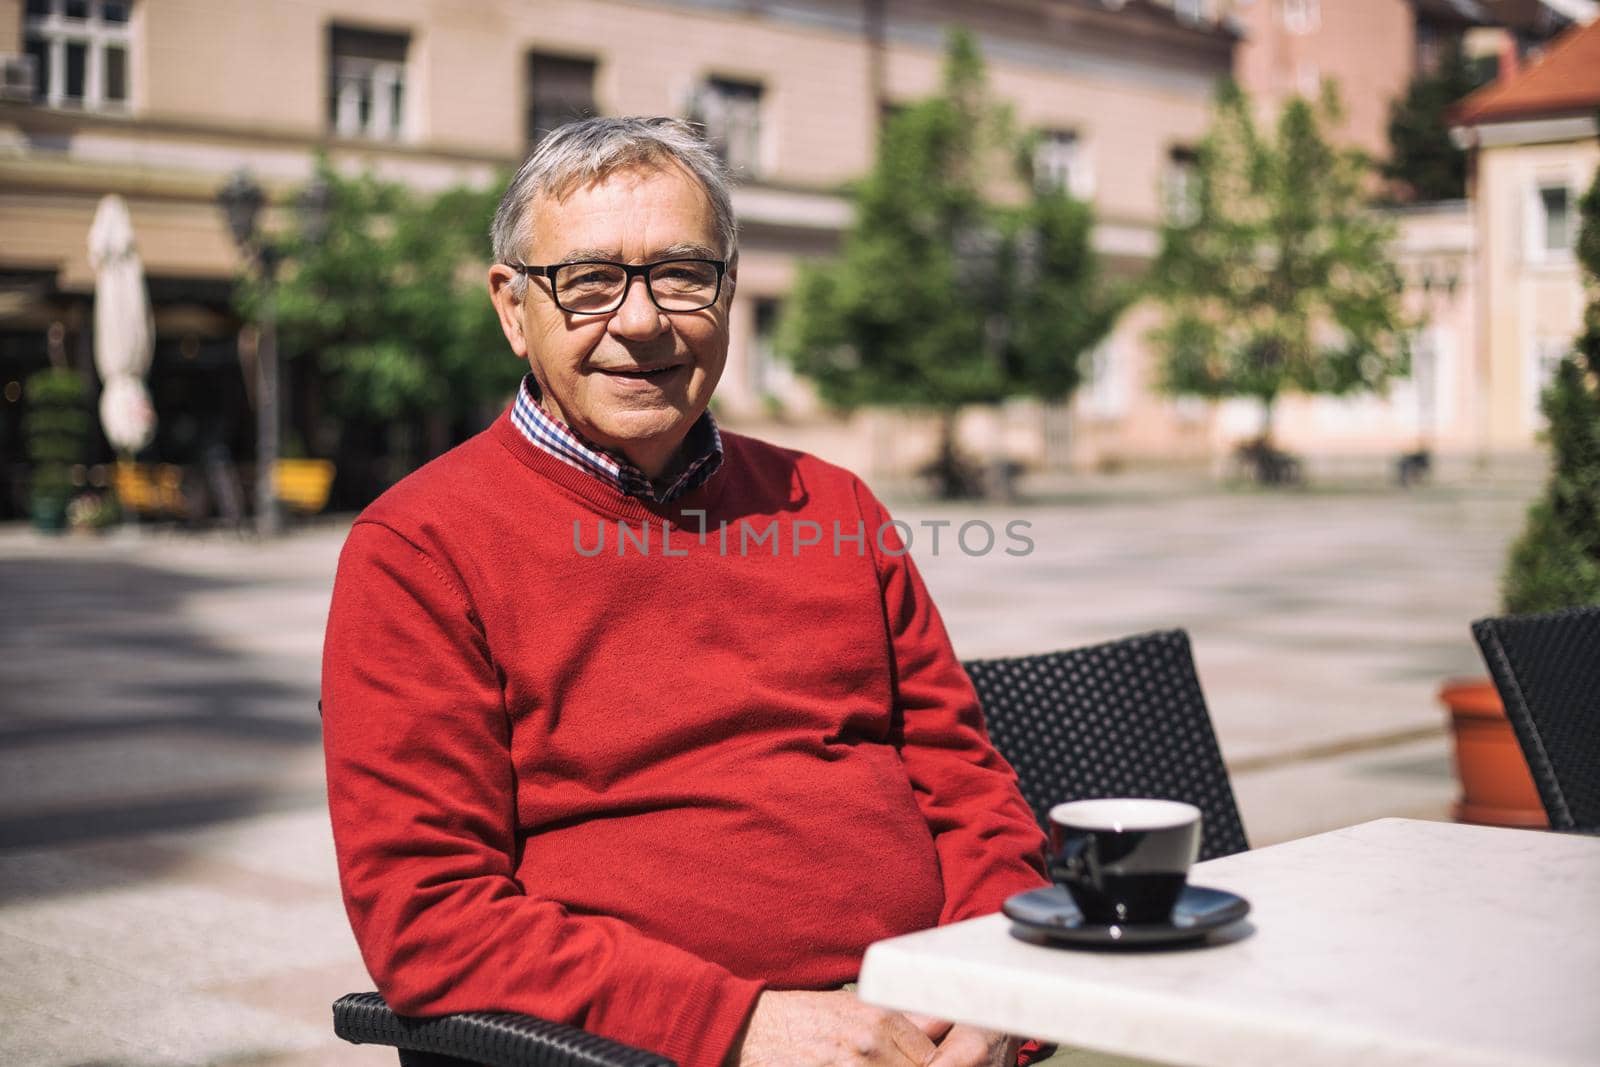 Cheerful senior man enjoys drinking coffee at the bar.Image is intentionally toned.